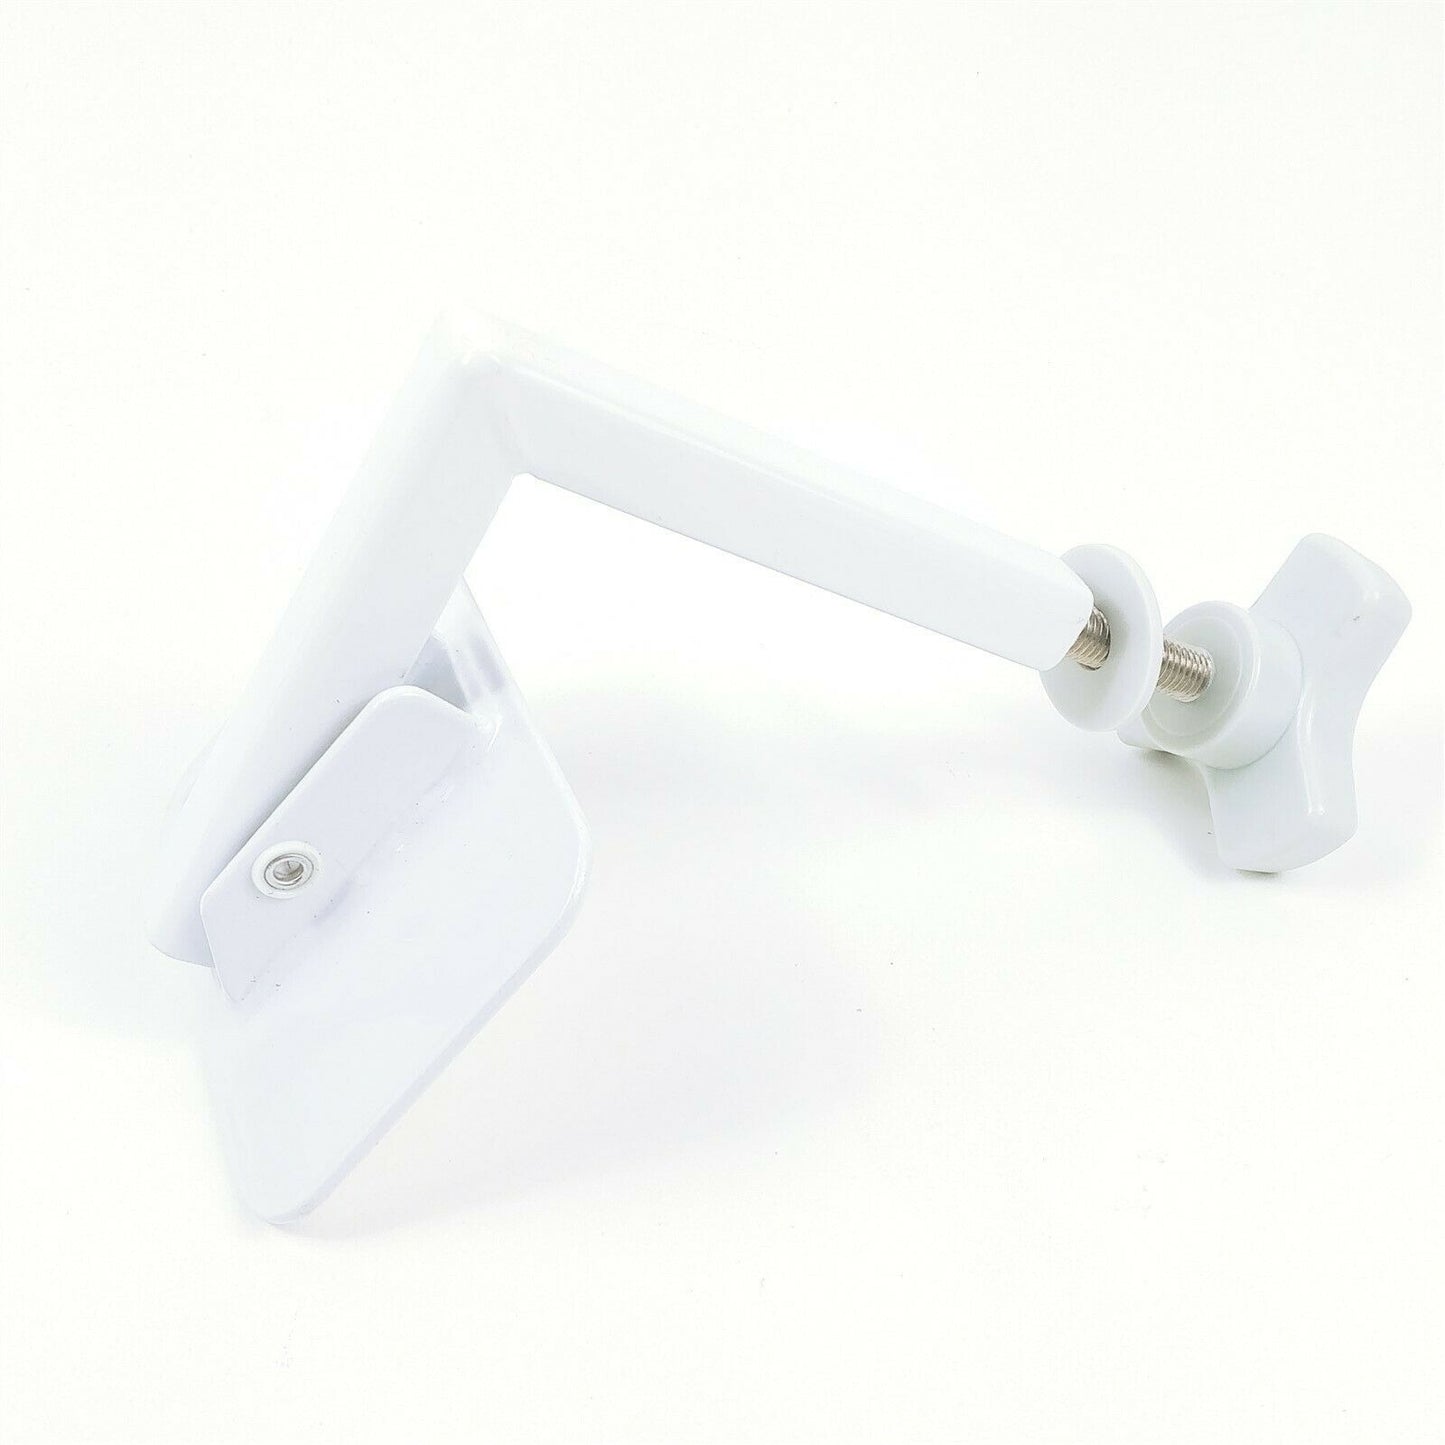 Medline Tab Grab Bar Replacement Adjustable Plate with Threaded Knob